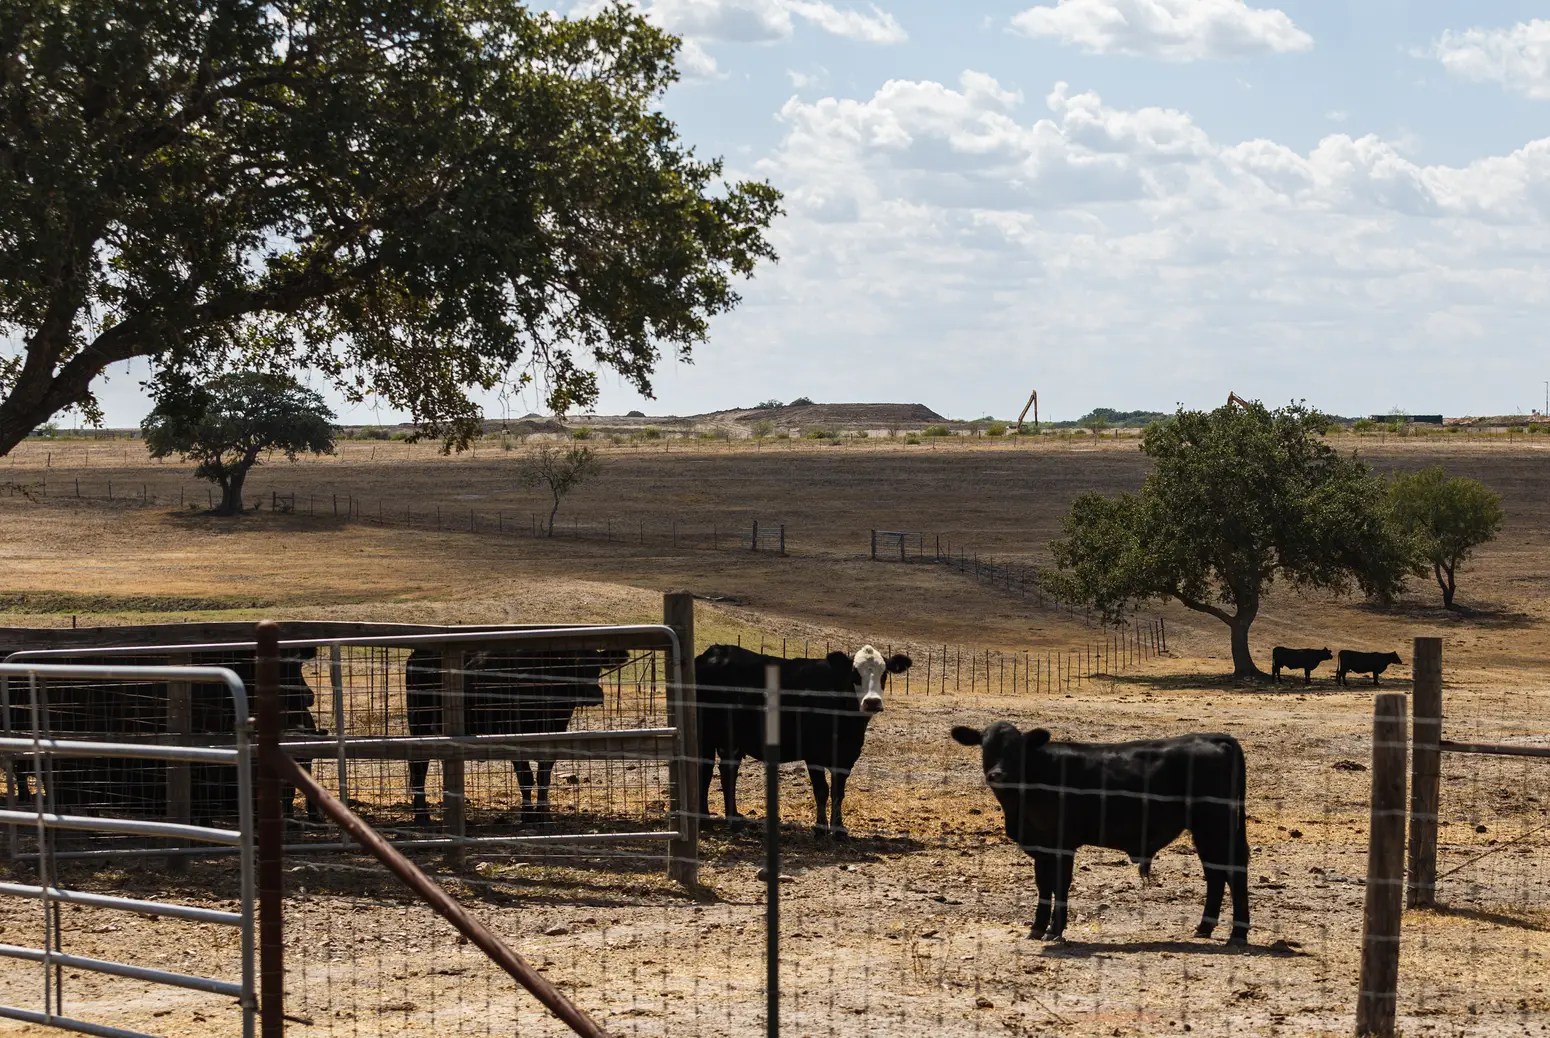 A group of black cows stand behind a fence amid rolling hills.